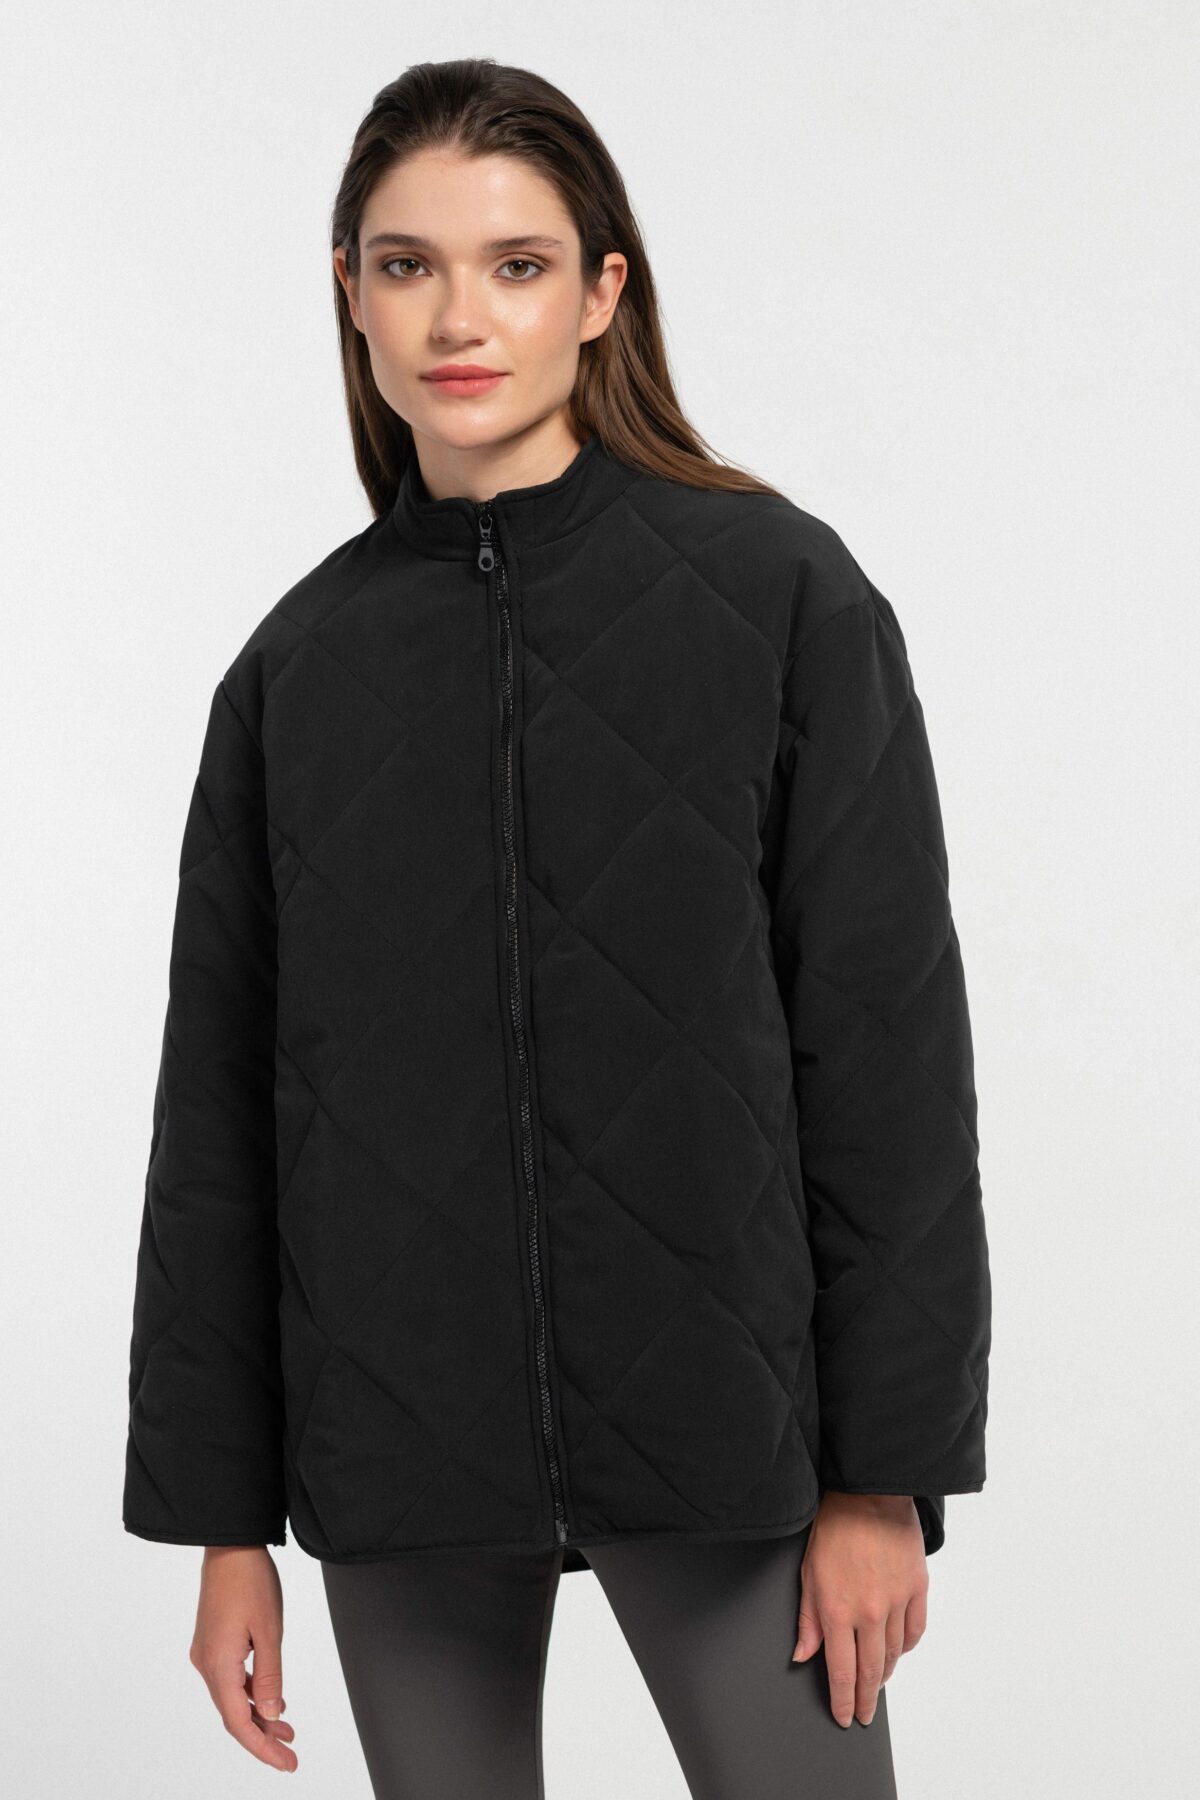 Philosophy Quilted Jacket